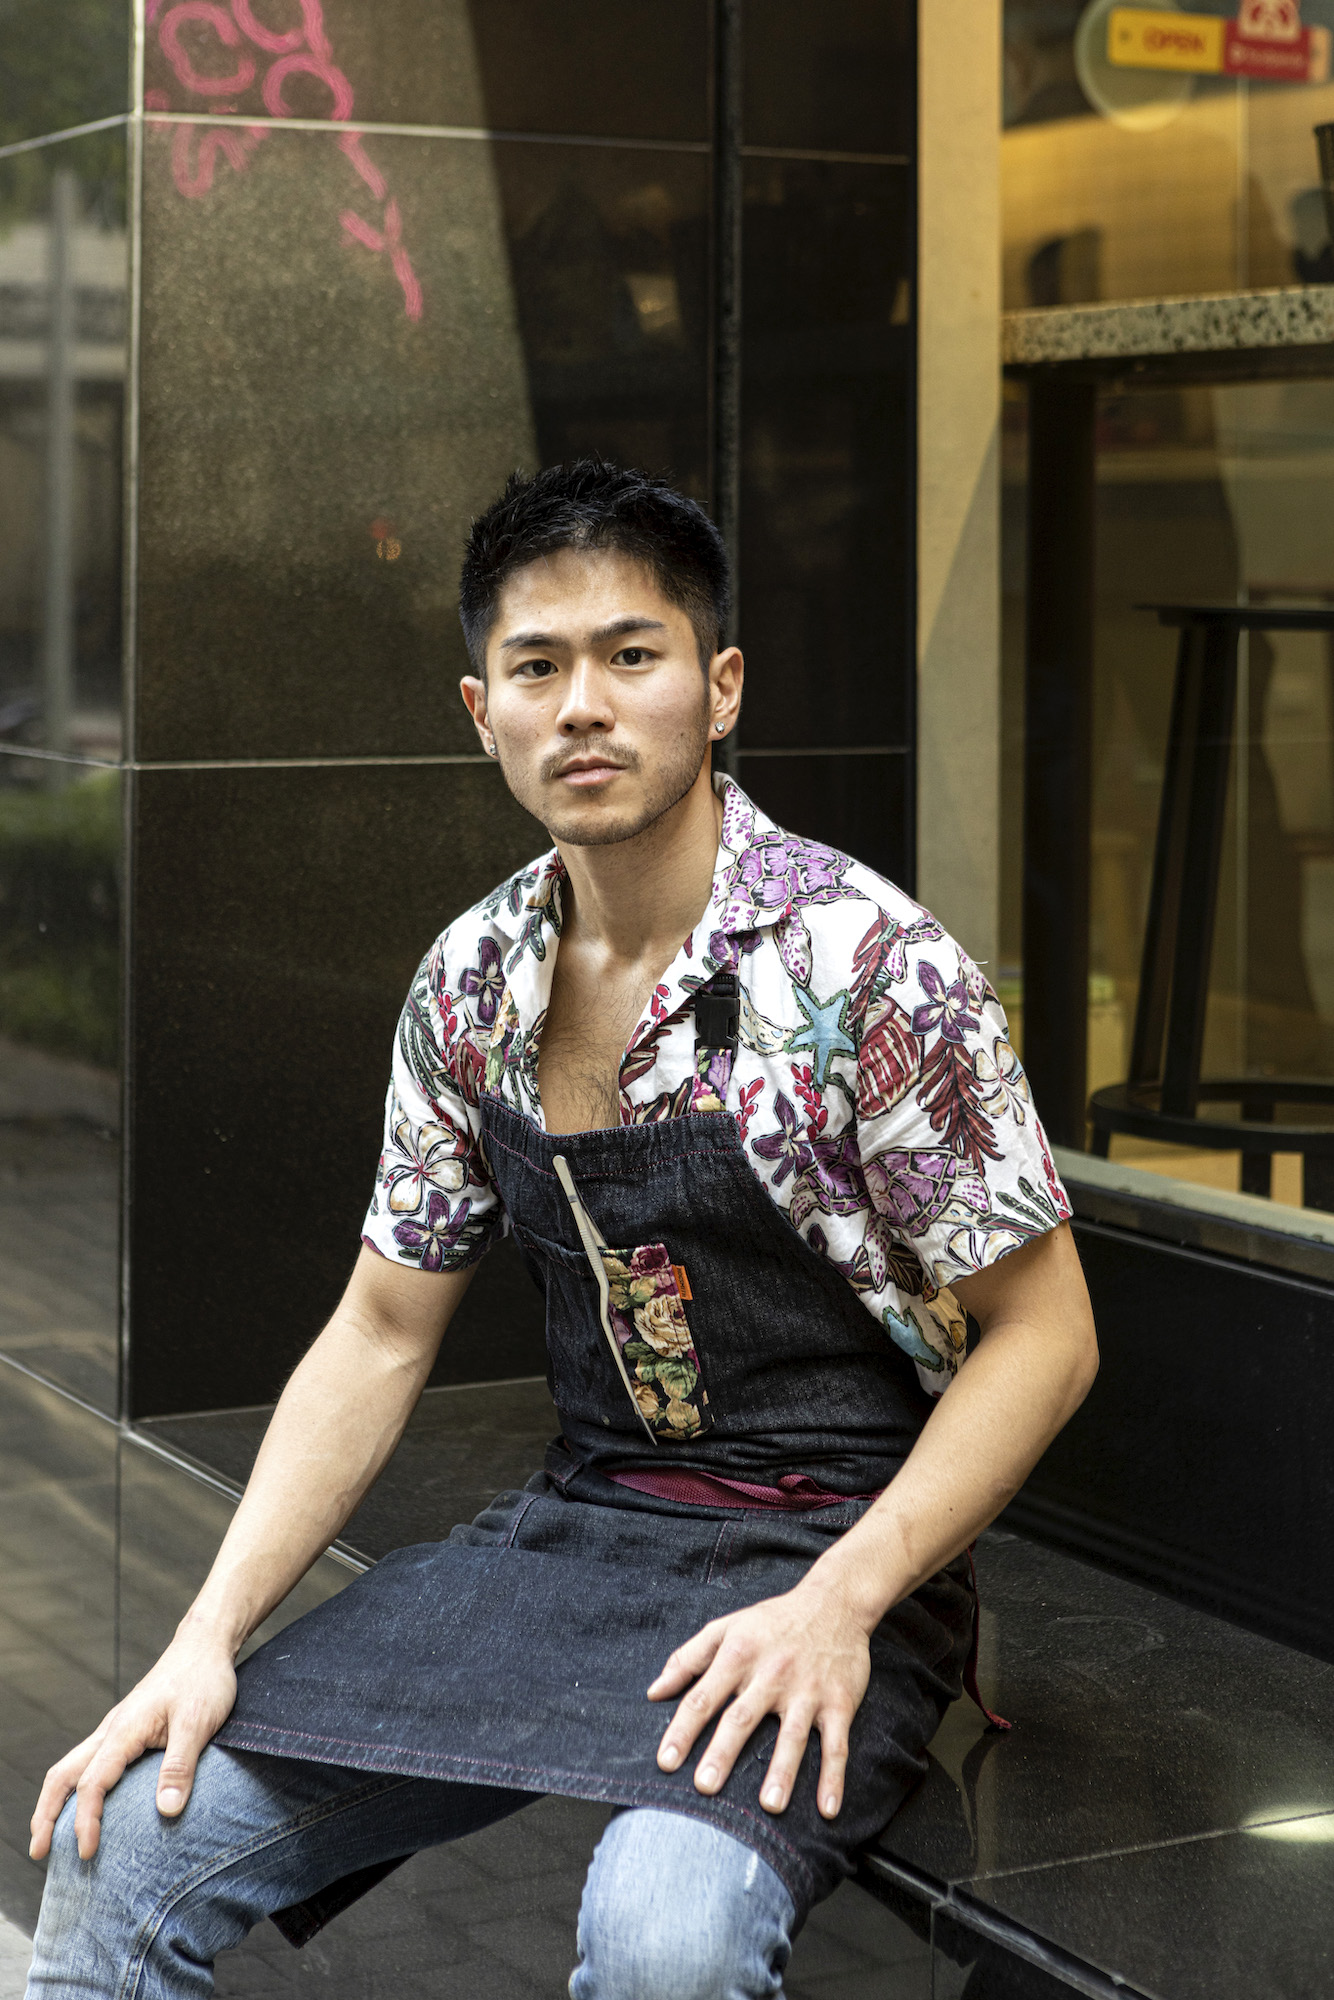 Prior to becoming the new Crosta pizzaiolo, Filipino-Japanese Yuichi Abellare Ito helmed The Pizza Bar on 38th at the Mandarin Oriental, Tokyo—the number one pizza restaurant in Japan